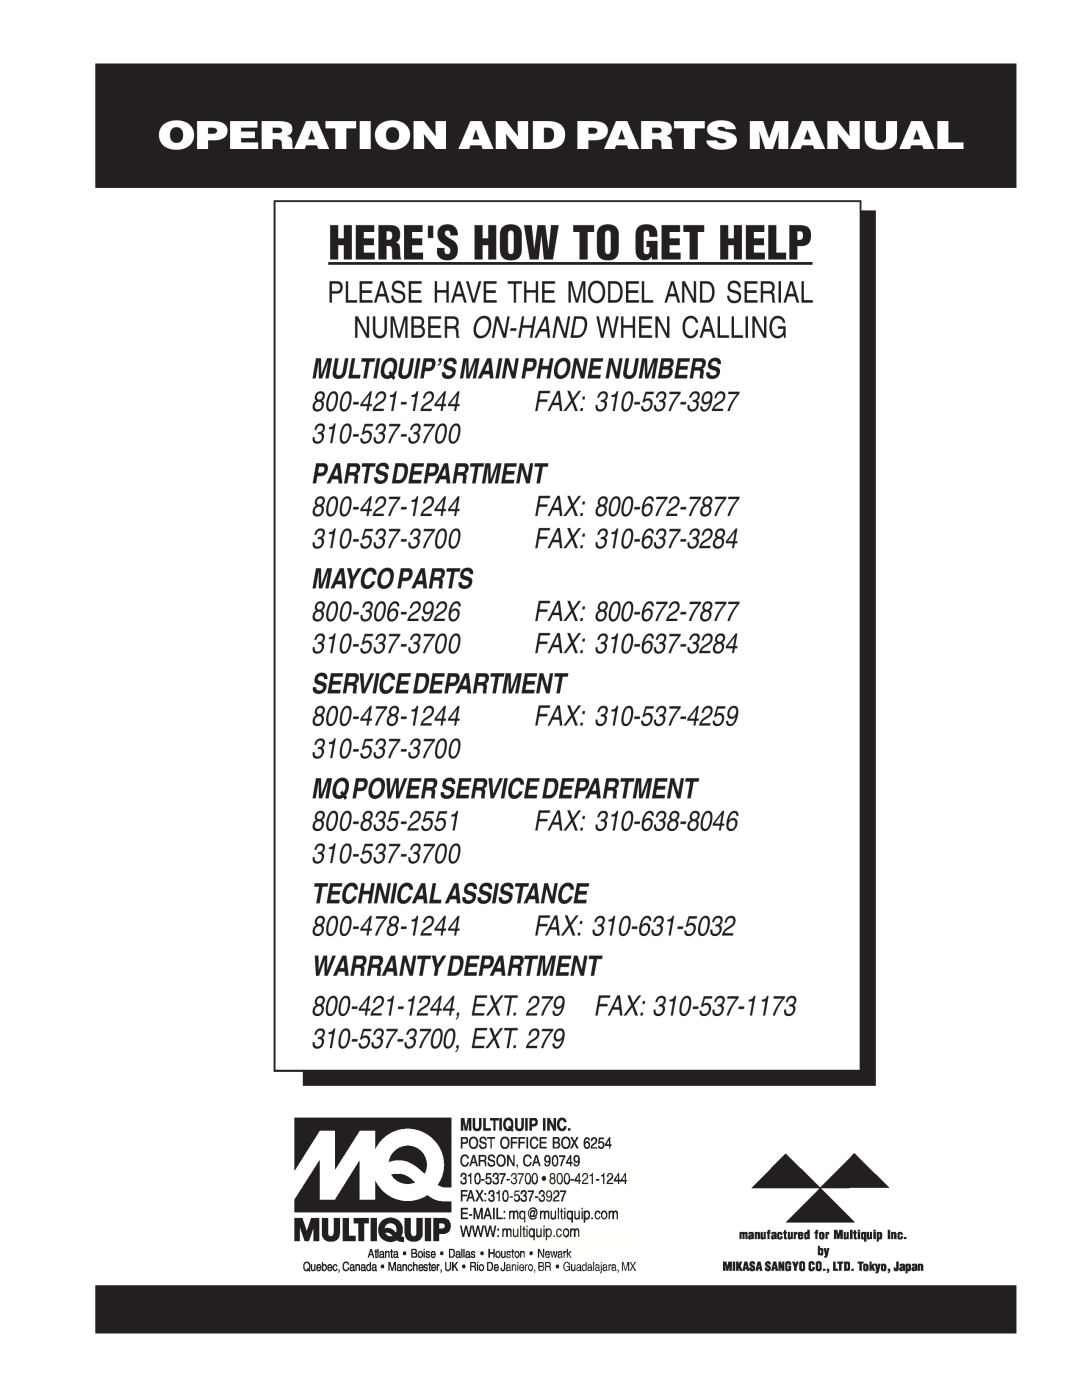 Multiquip MVH-402DSB Technicalassistance, Heres How To Get Help, Operation And Parts Manual, Number On-Hand When Calling 